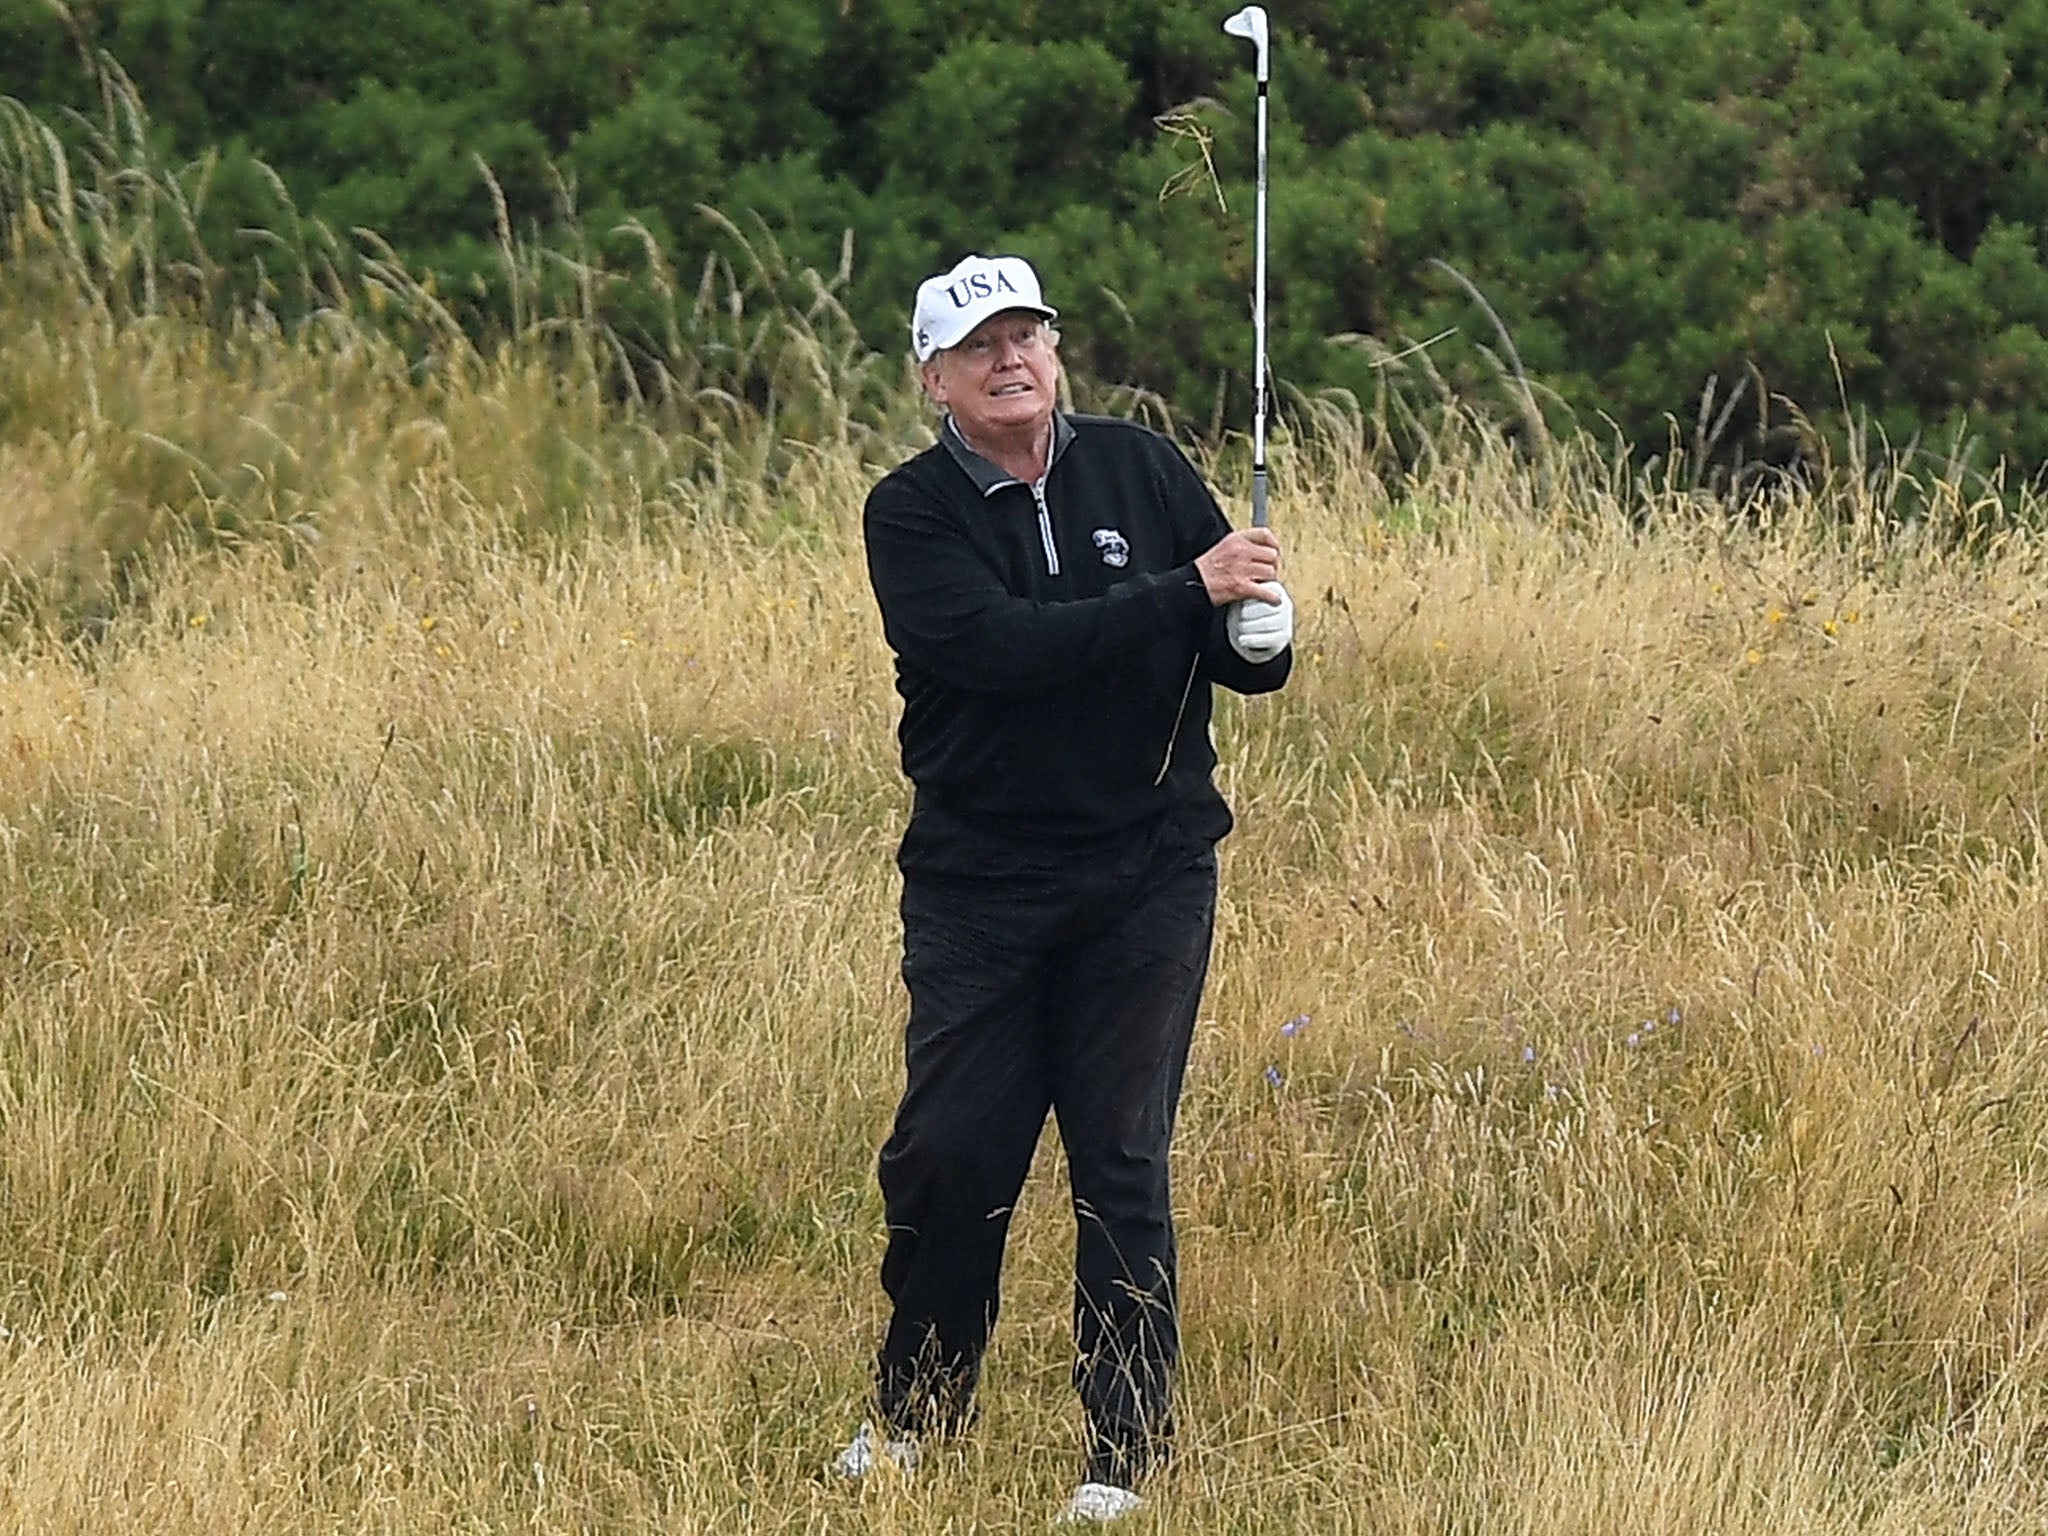 Mr Trump spent two days at his Turnberry golf course in Scotland in the middle of an official trip to Europe